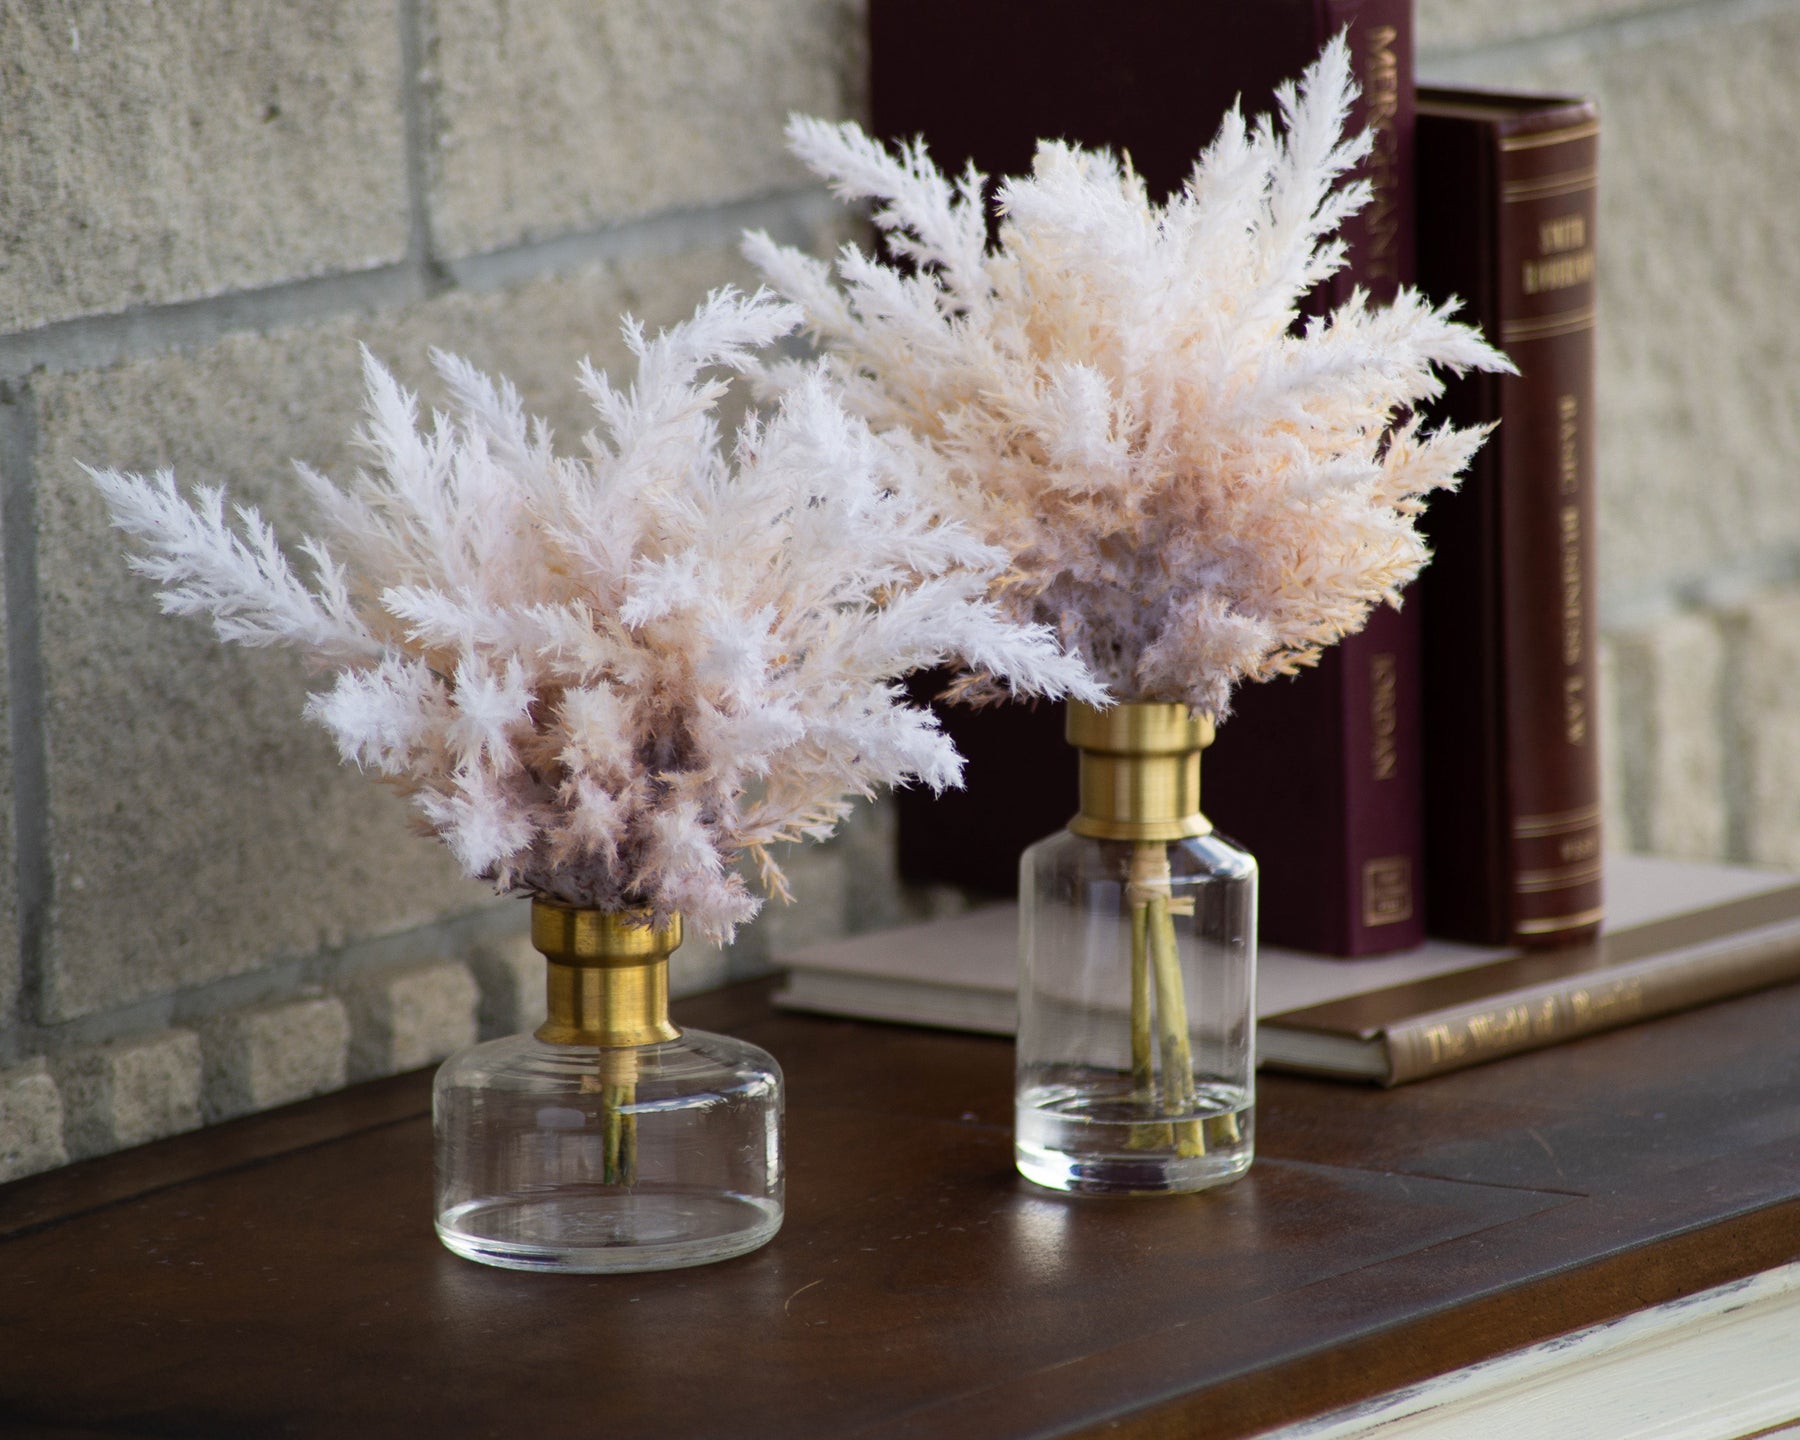 Ombre Pampas Grass Arrangement in Glass Bud Vase with Antiqued Gold Ri –  Darby Creek Trading